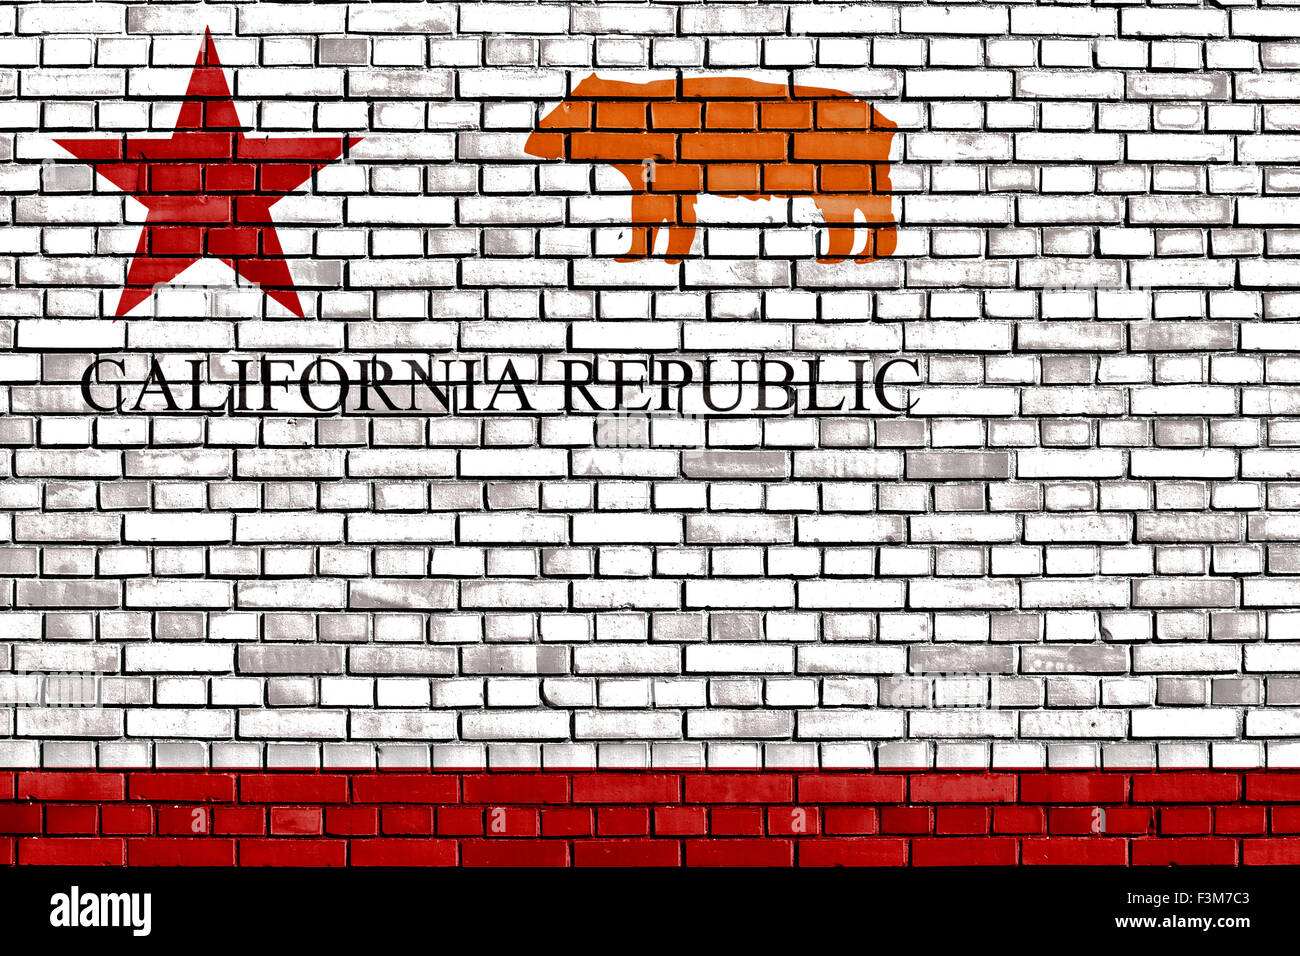 flag of California republic painted on brick wall Stock Photo